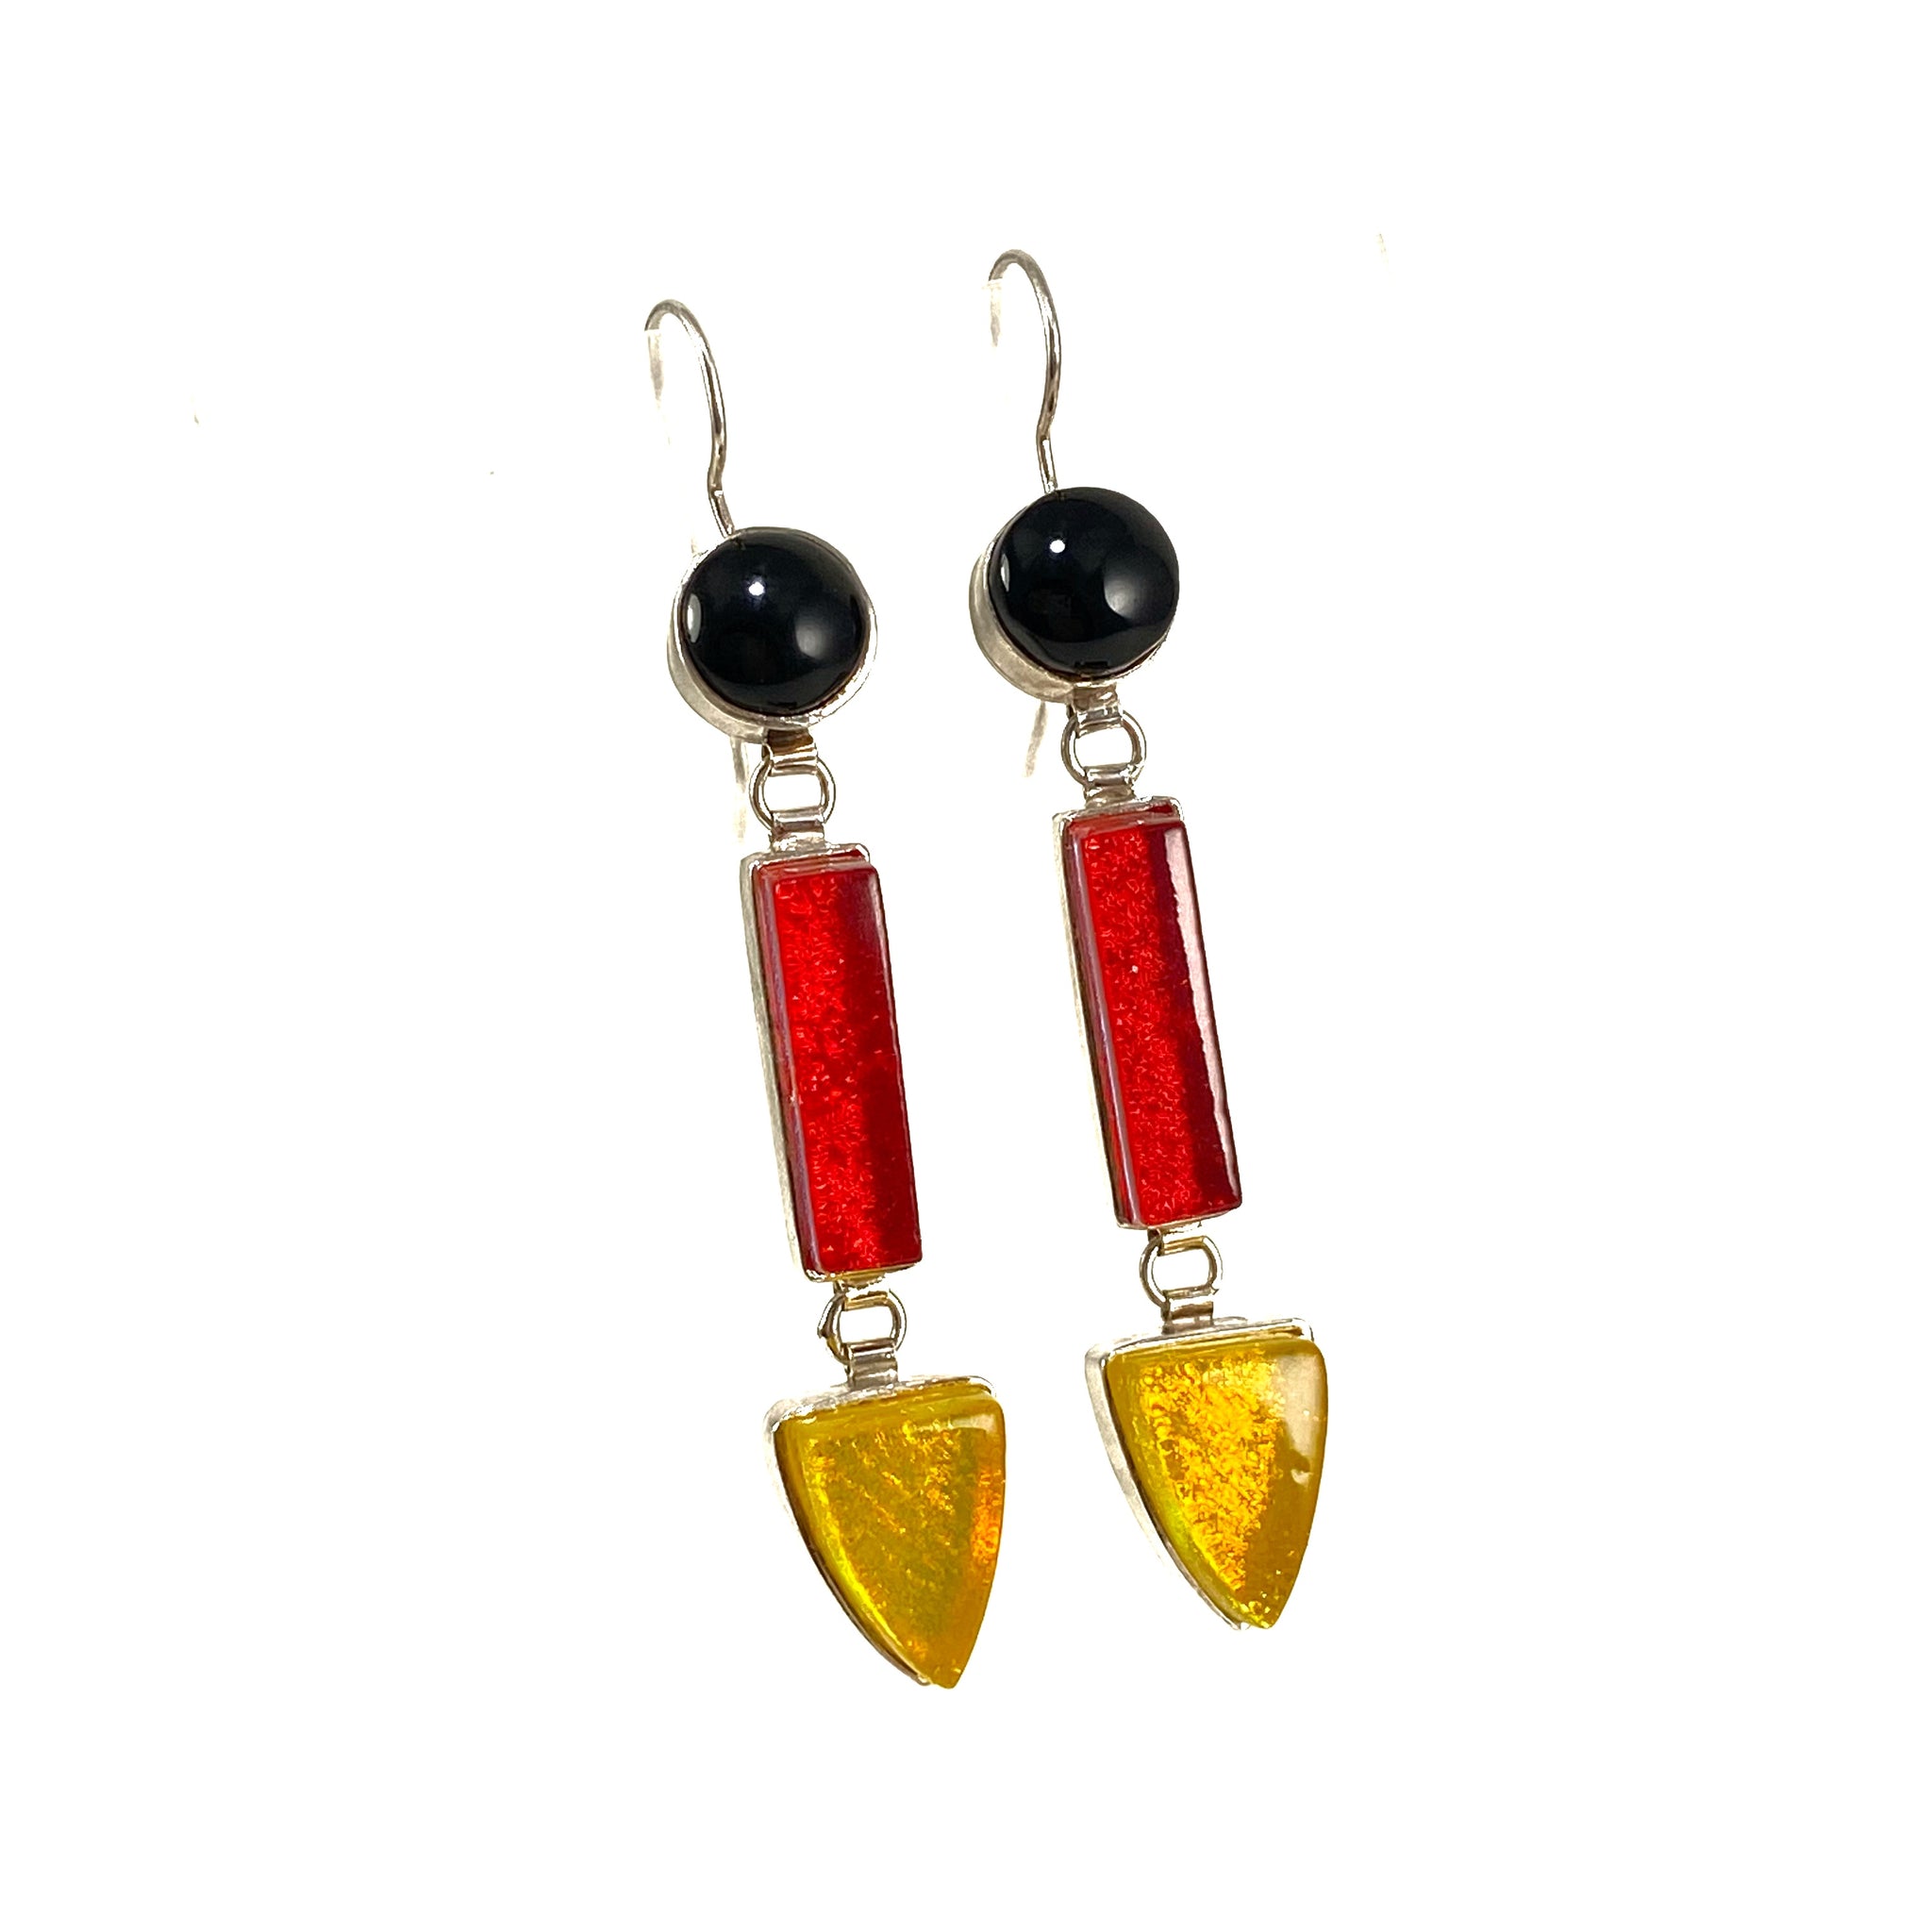 black, red, yellow, triple drop earrings, fused glass, glass jewelry, glass and silver jewelry, handmade, handcrafted, American Craft, hand fabricated jewelry, hand fabricated jewellery,  Athen, Georgia, colorful jewelry, sparkle, bullseye glass, dichroic glass, art jewelry  